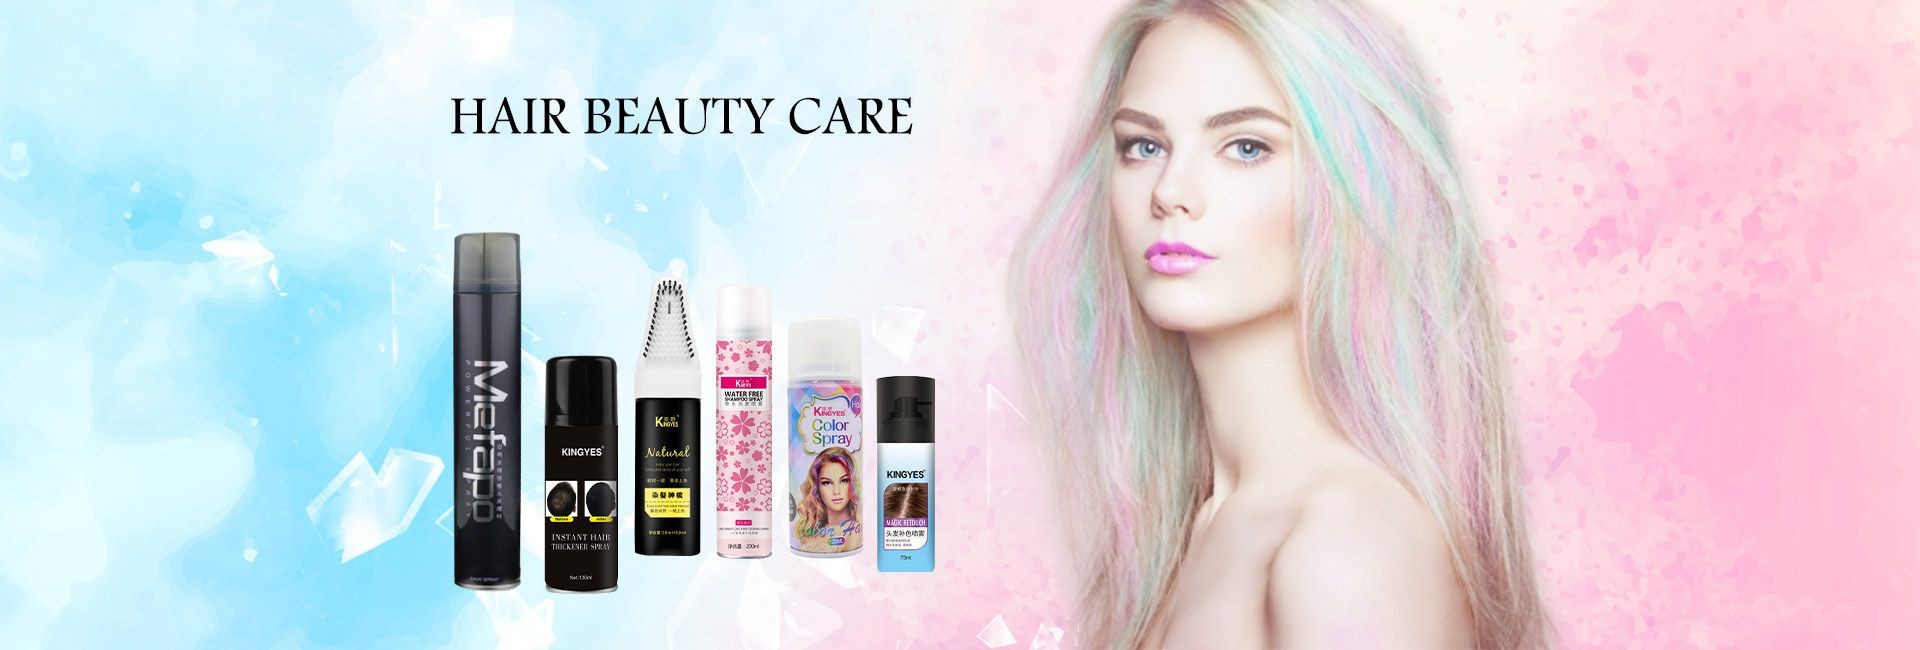 Dongguan Mefapo Cosmetic Products Co., Ltd.